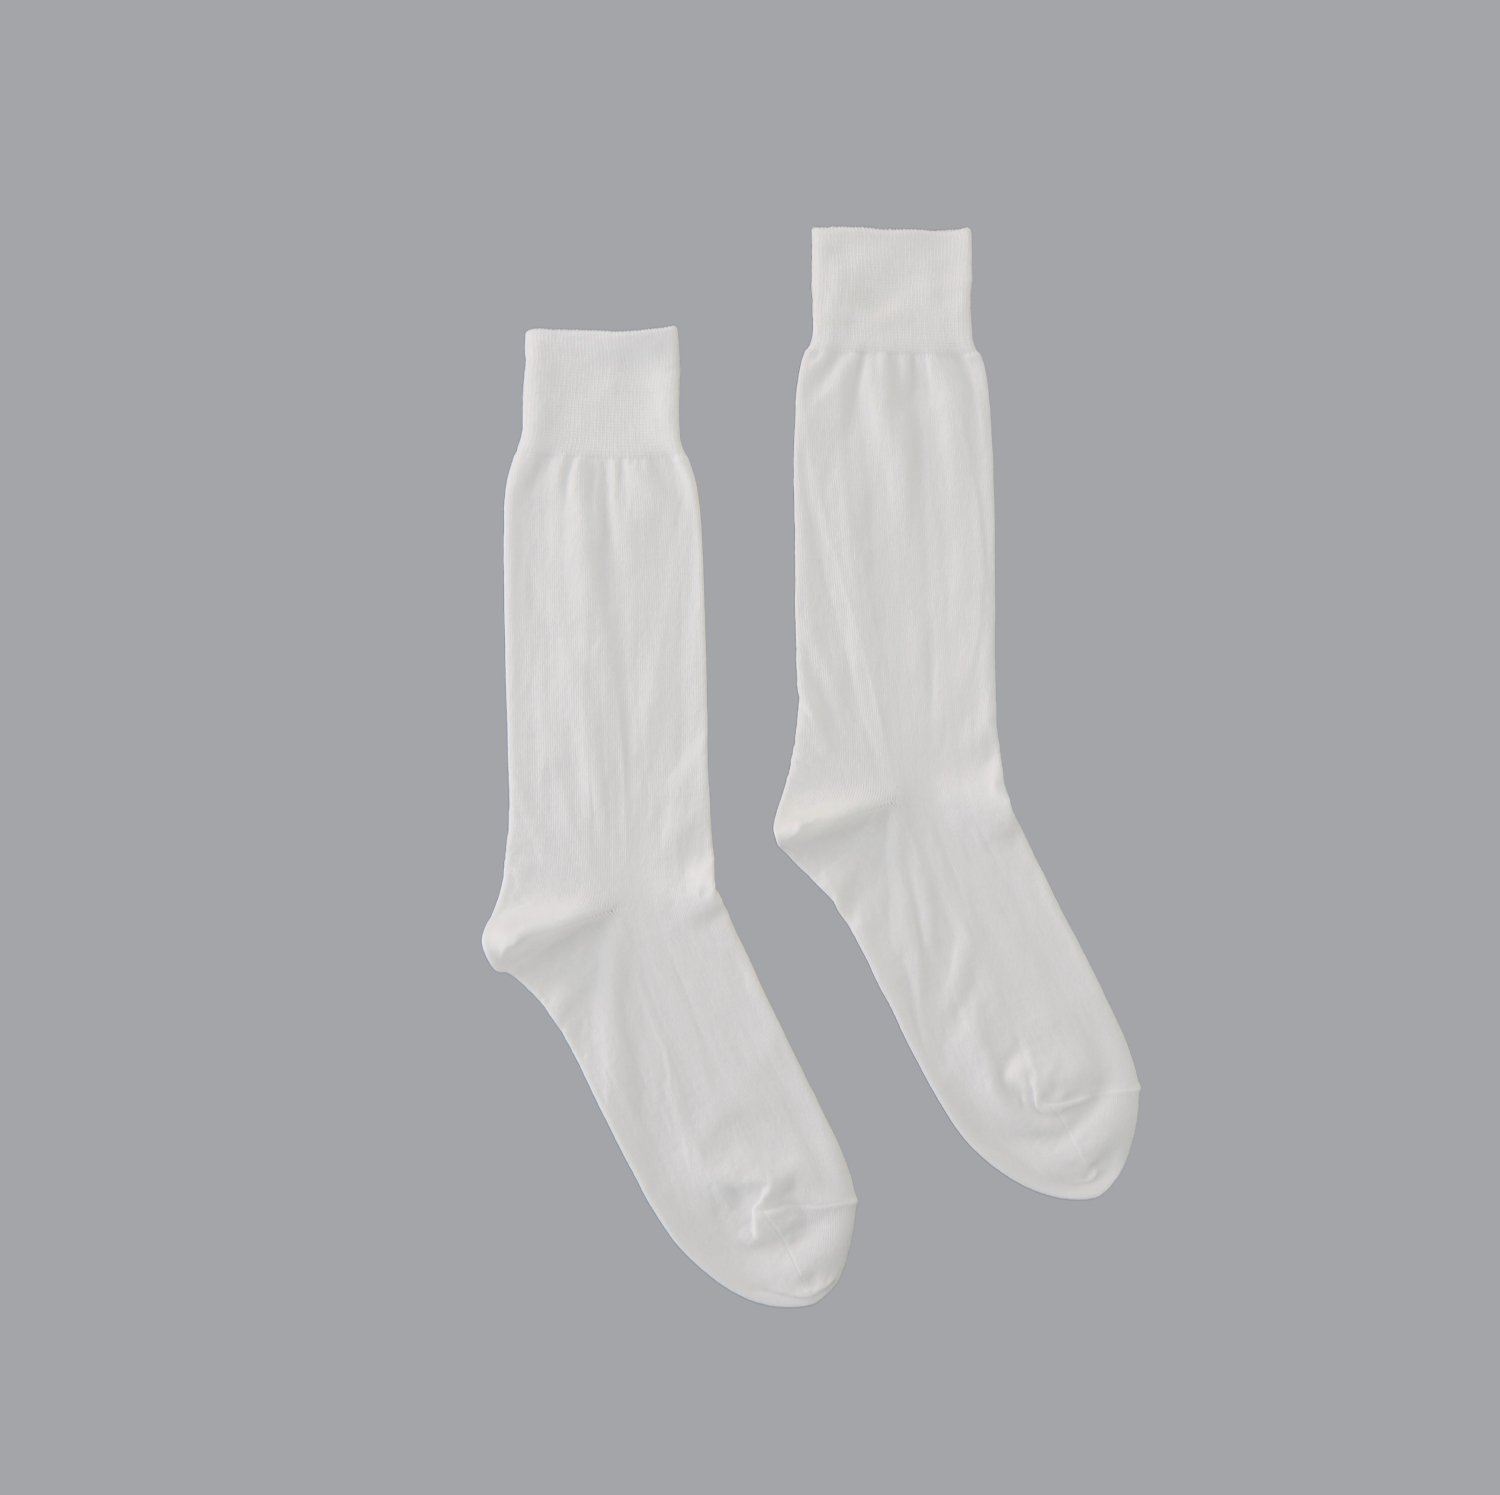 cotton socks / egyptian cotton 22-24cm (cool white) - Information minami  aoyama - online shop : clothes and objects｜インフォメーション - 南青山 : 服とオブジェ